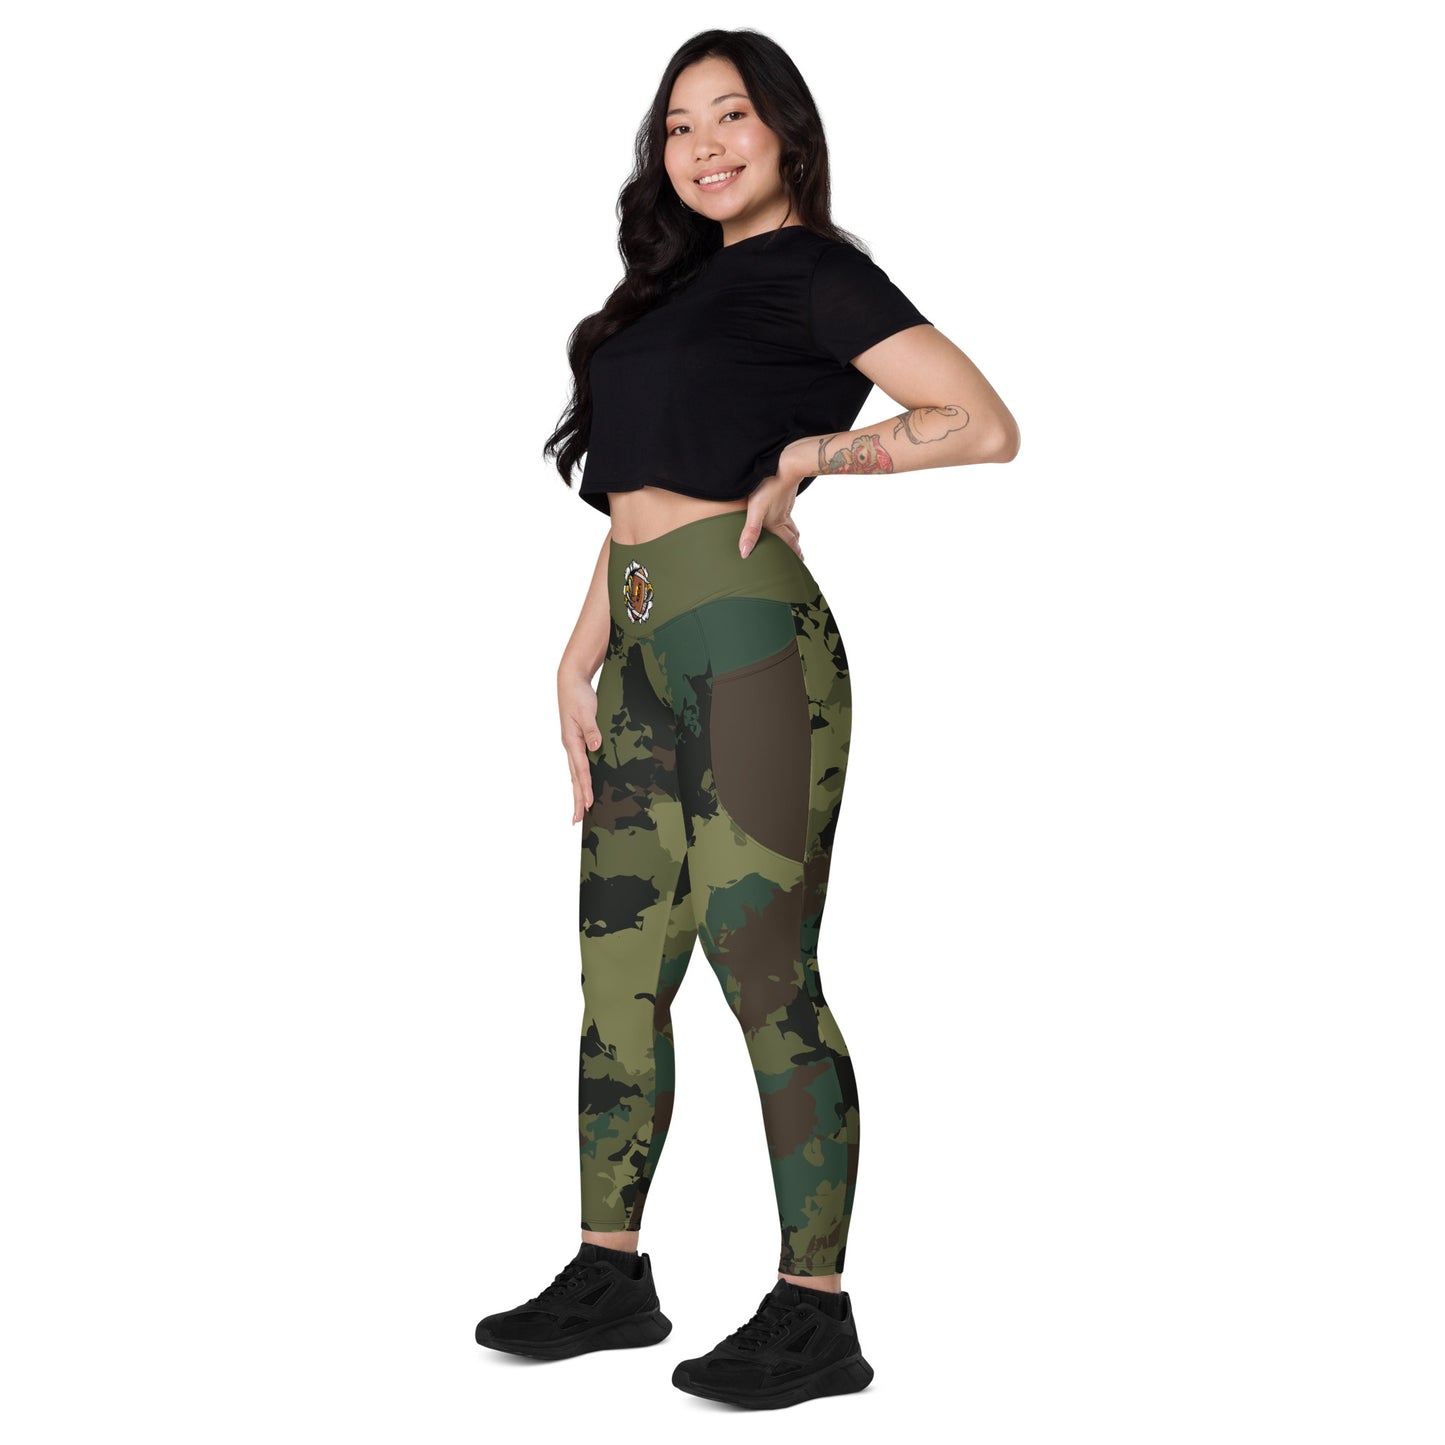 Kicxs Camouflage Leggings With Pockets